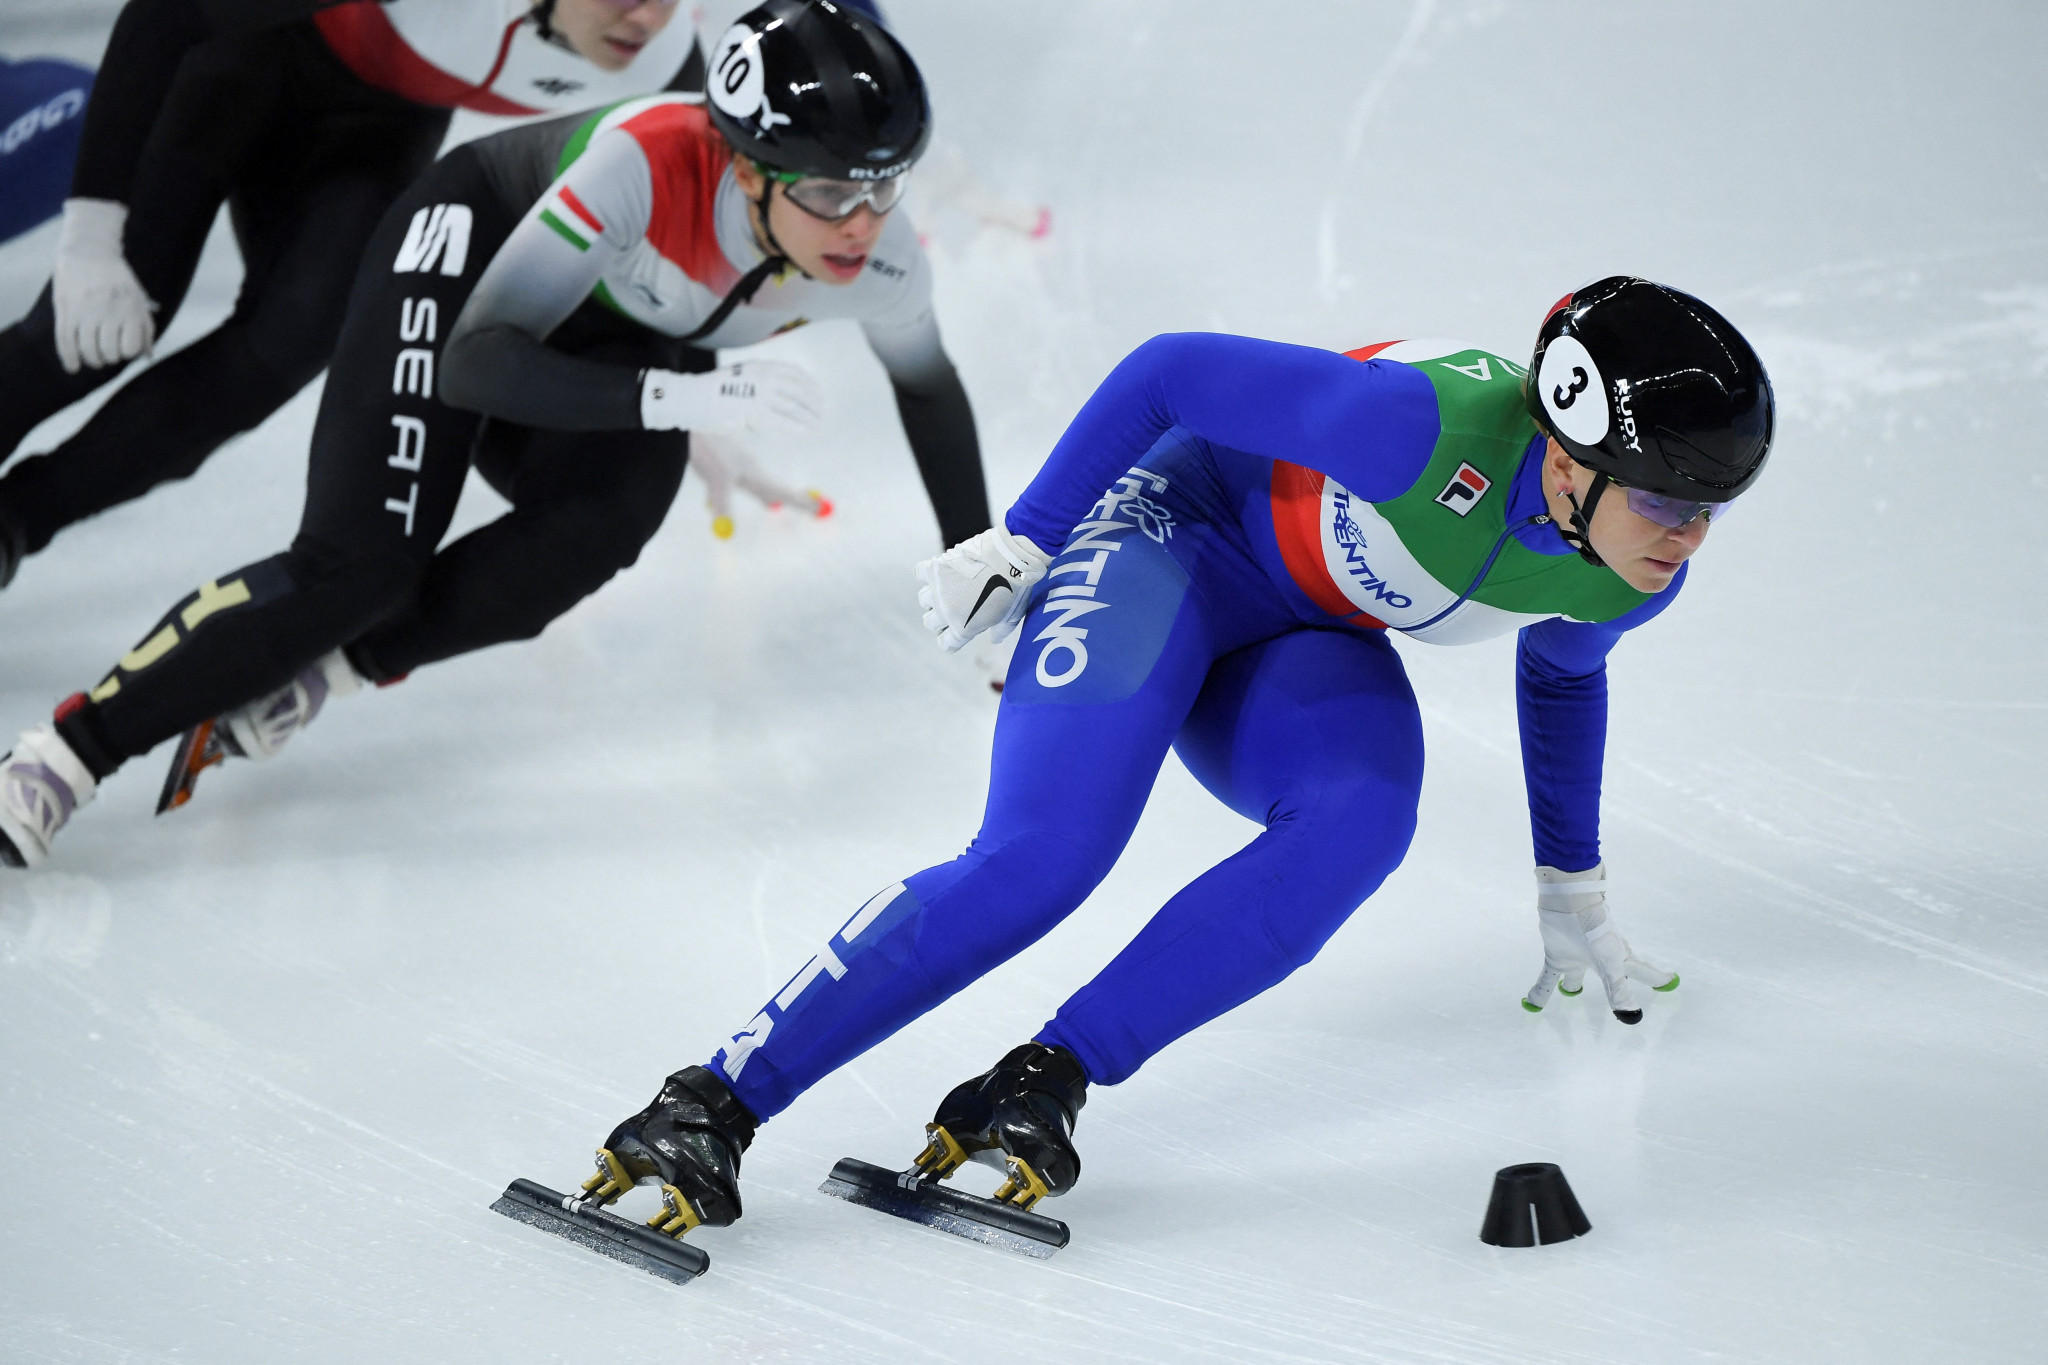 Confortola and Fontana secure Italian double at Short Track Speed Skating World Cup